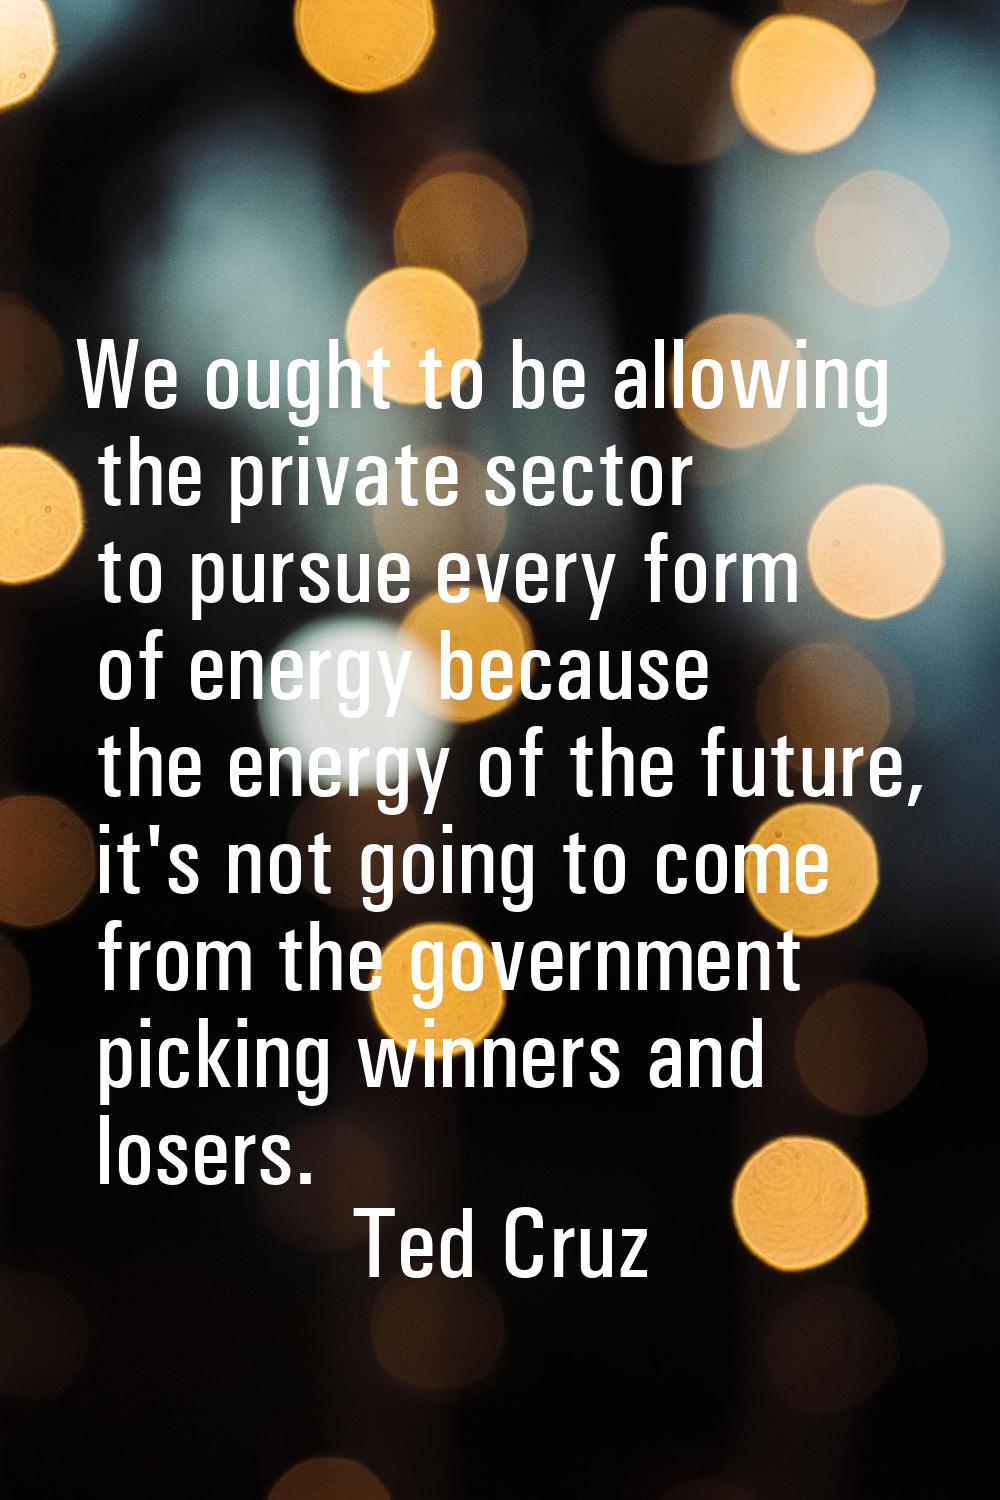 We ought to be allowing the private sector to pursue every form of energy because the energy of the